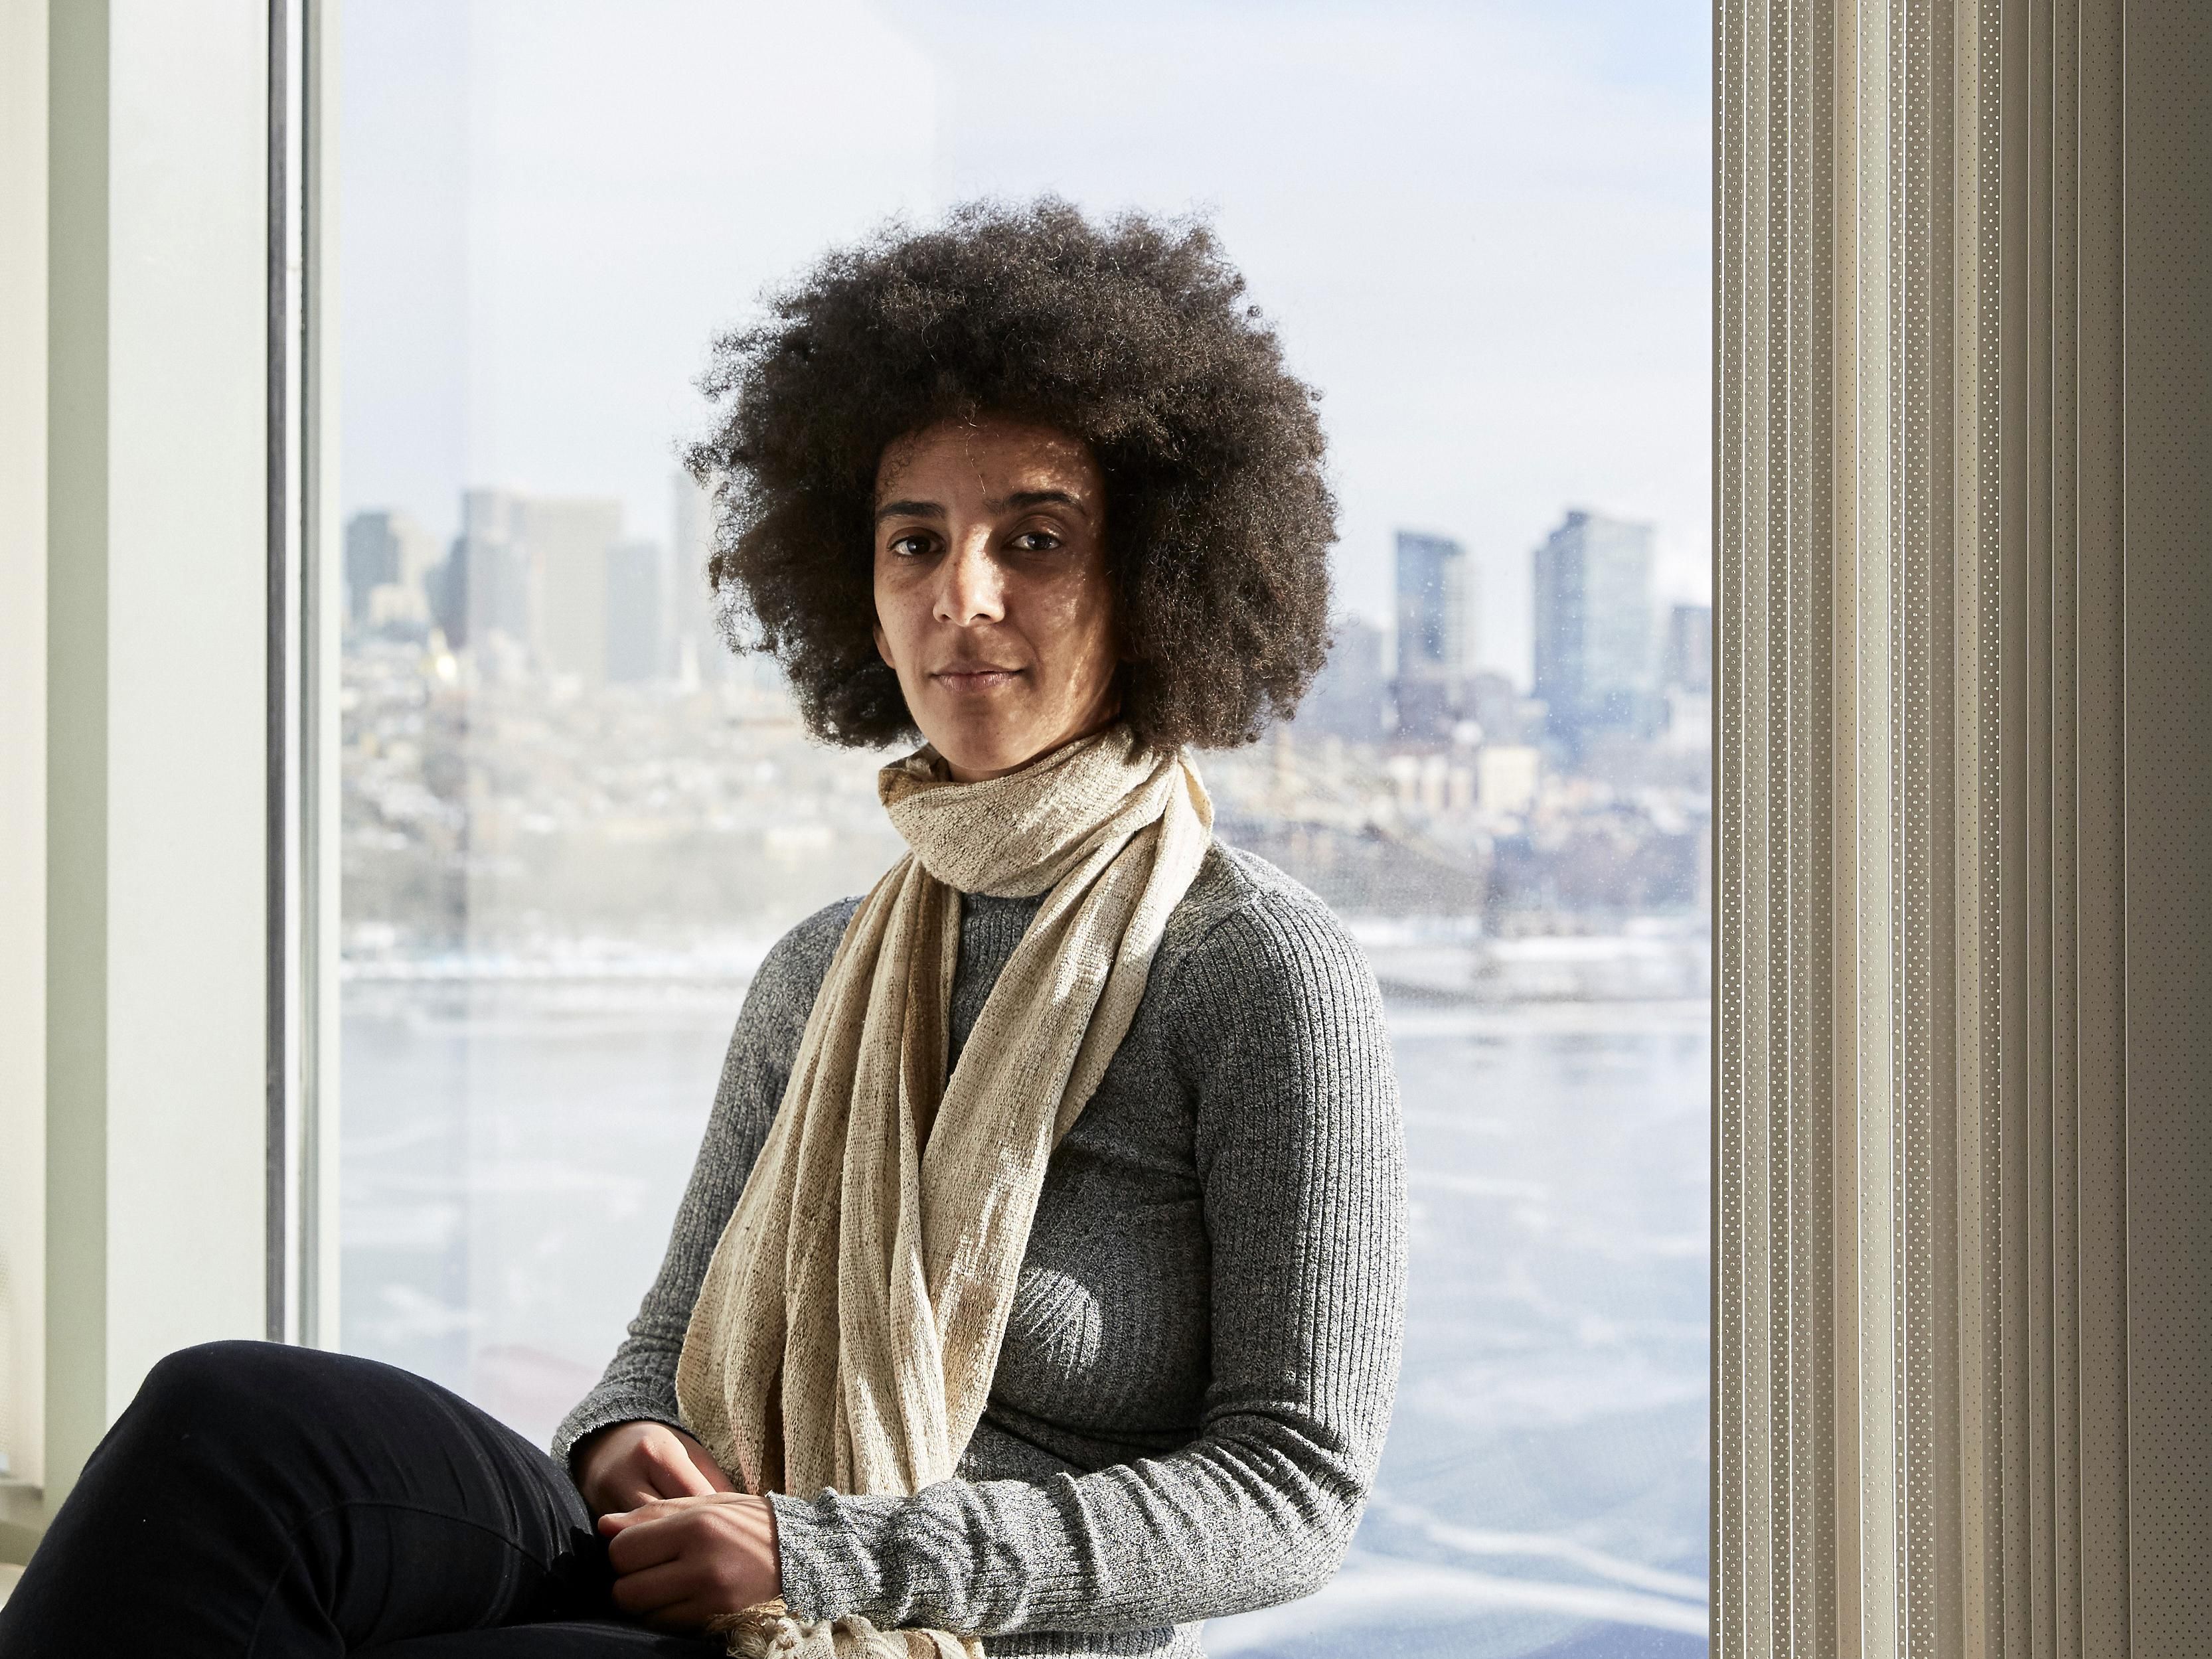 Portrait of a woman in a grey sweater and cream colored scarf sits in front of a window